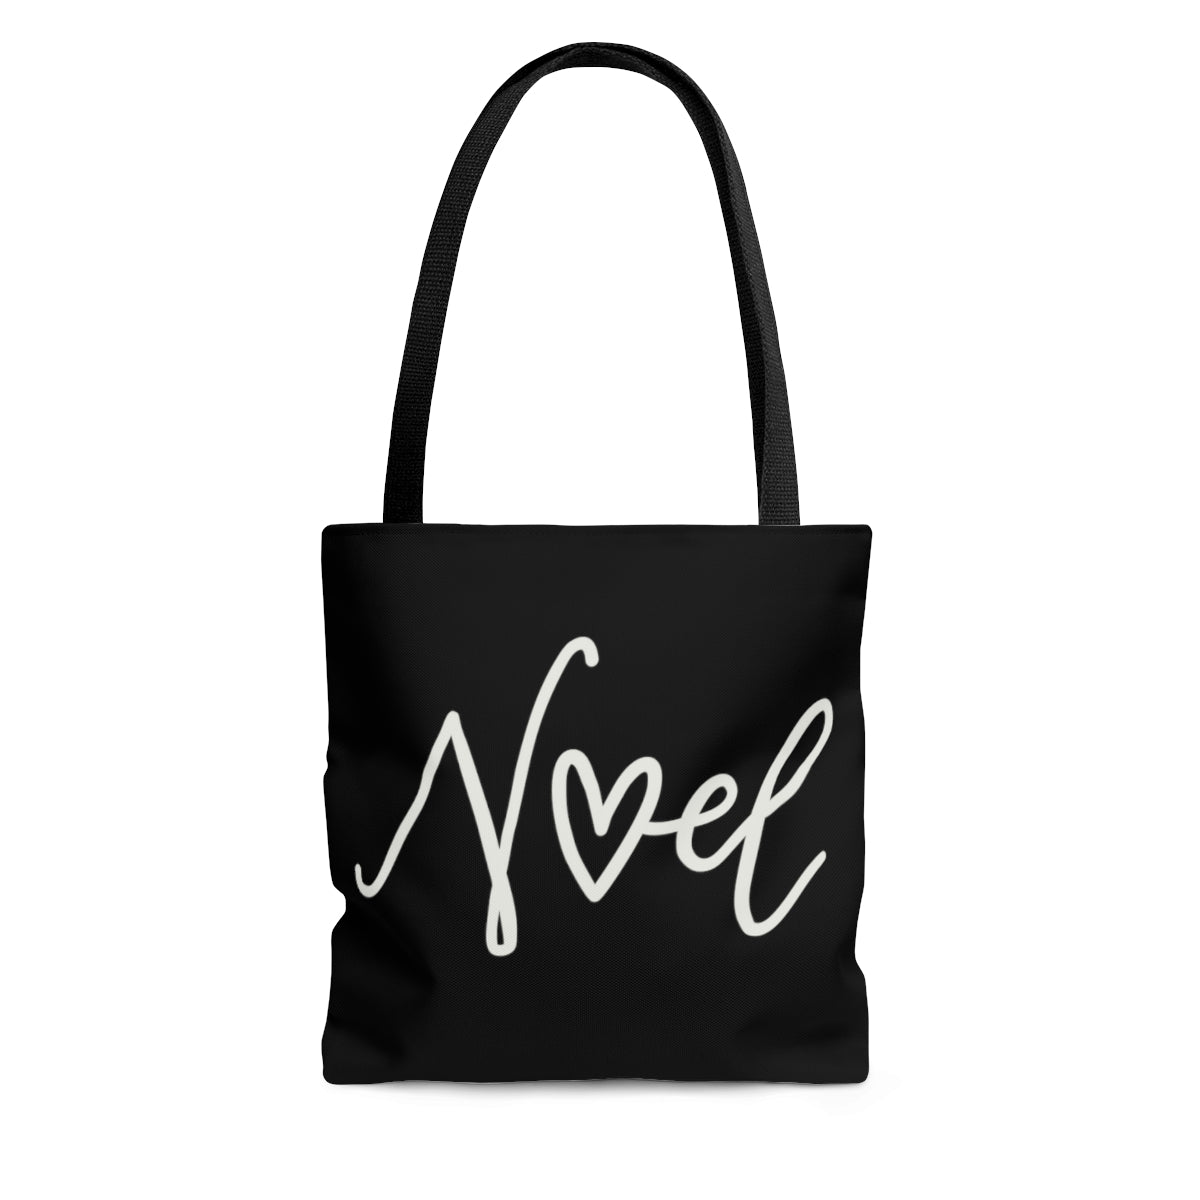 Noel Black Holiday Tote Bag - Travel Grocery Carry-on